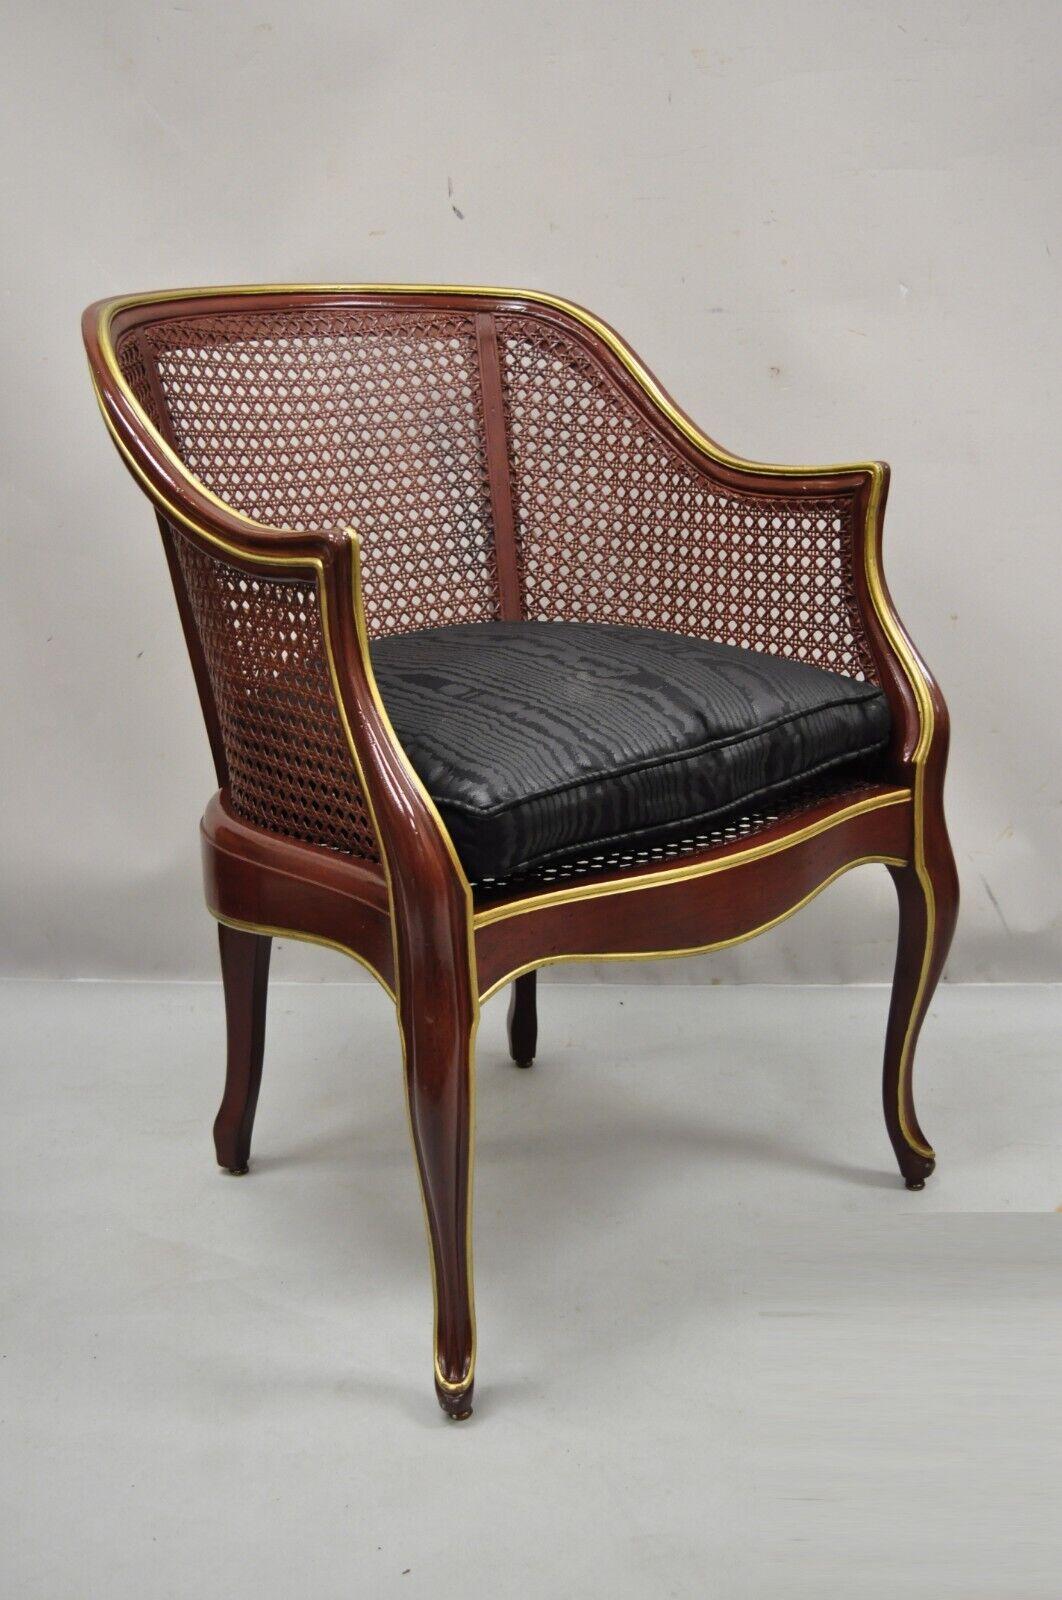 Vintage French Louis XV Style Red Lacquer Cane Bergere lounge chair. Item features dark red lacquer finish, gold accents, cane back and seat, solid wood frame, cabriole legs, very nice vintage item, great style and form. Circa Mid 20th Century.